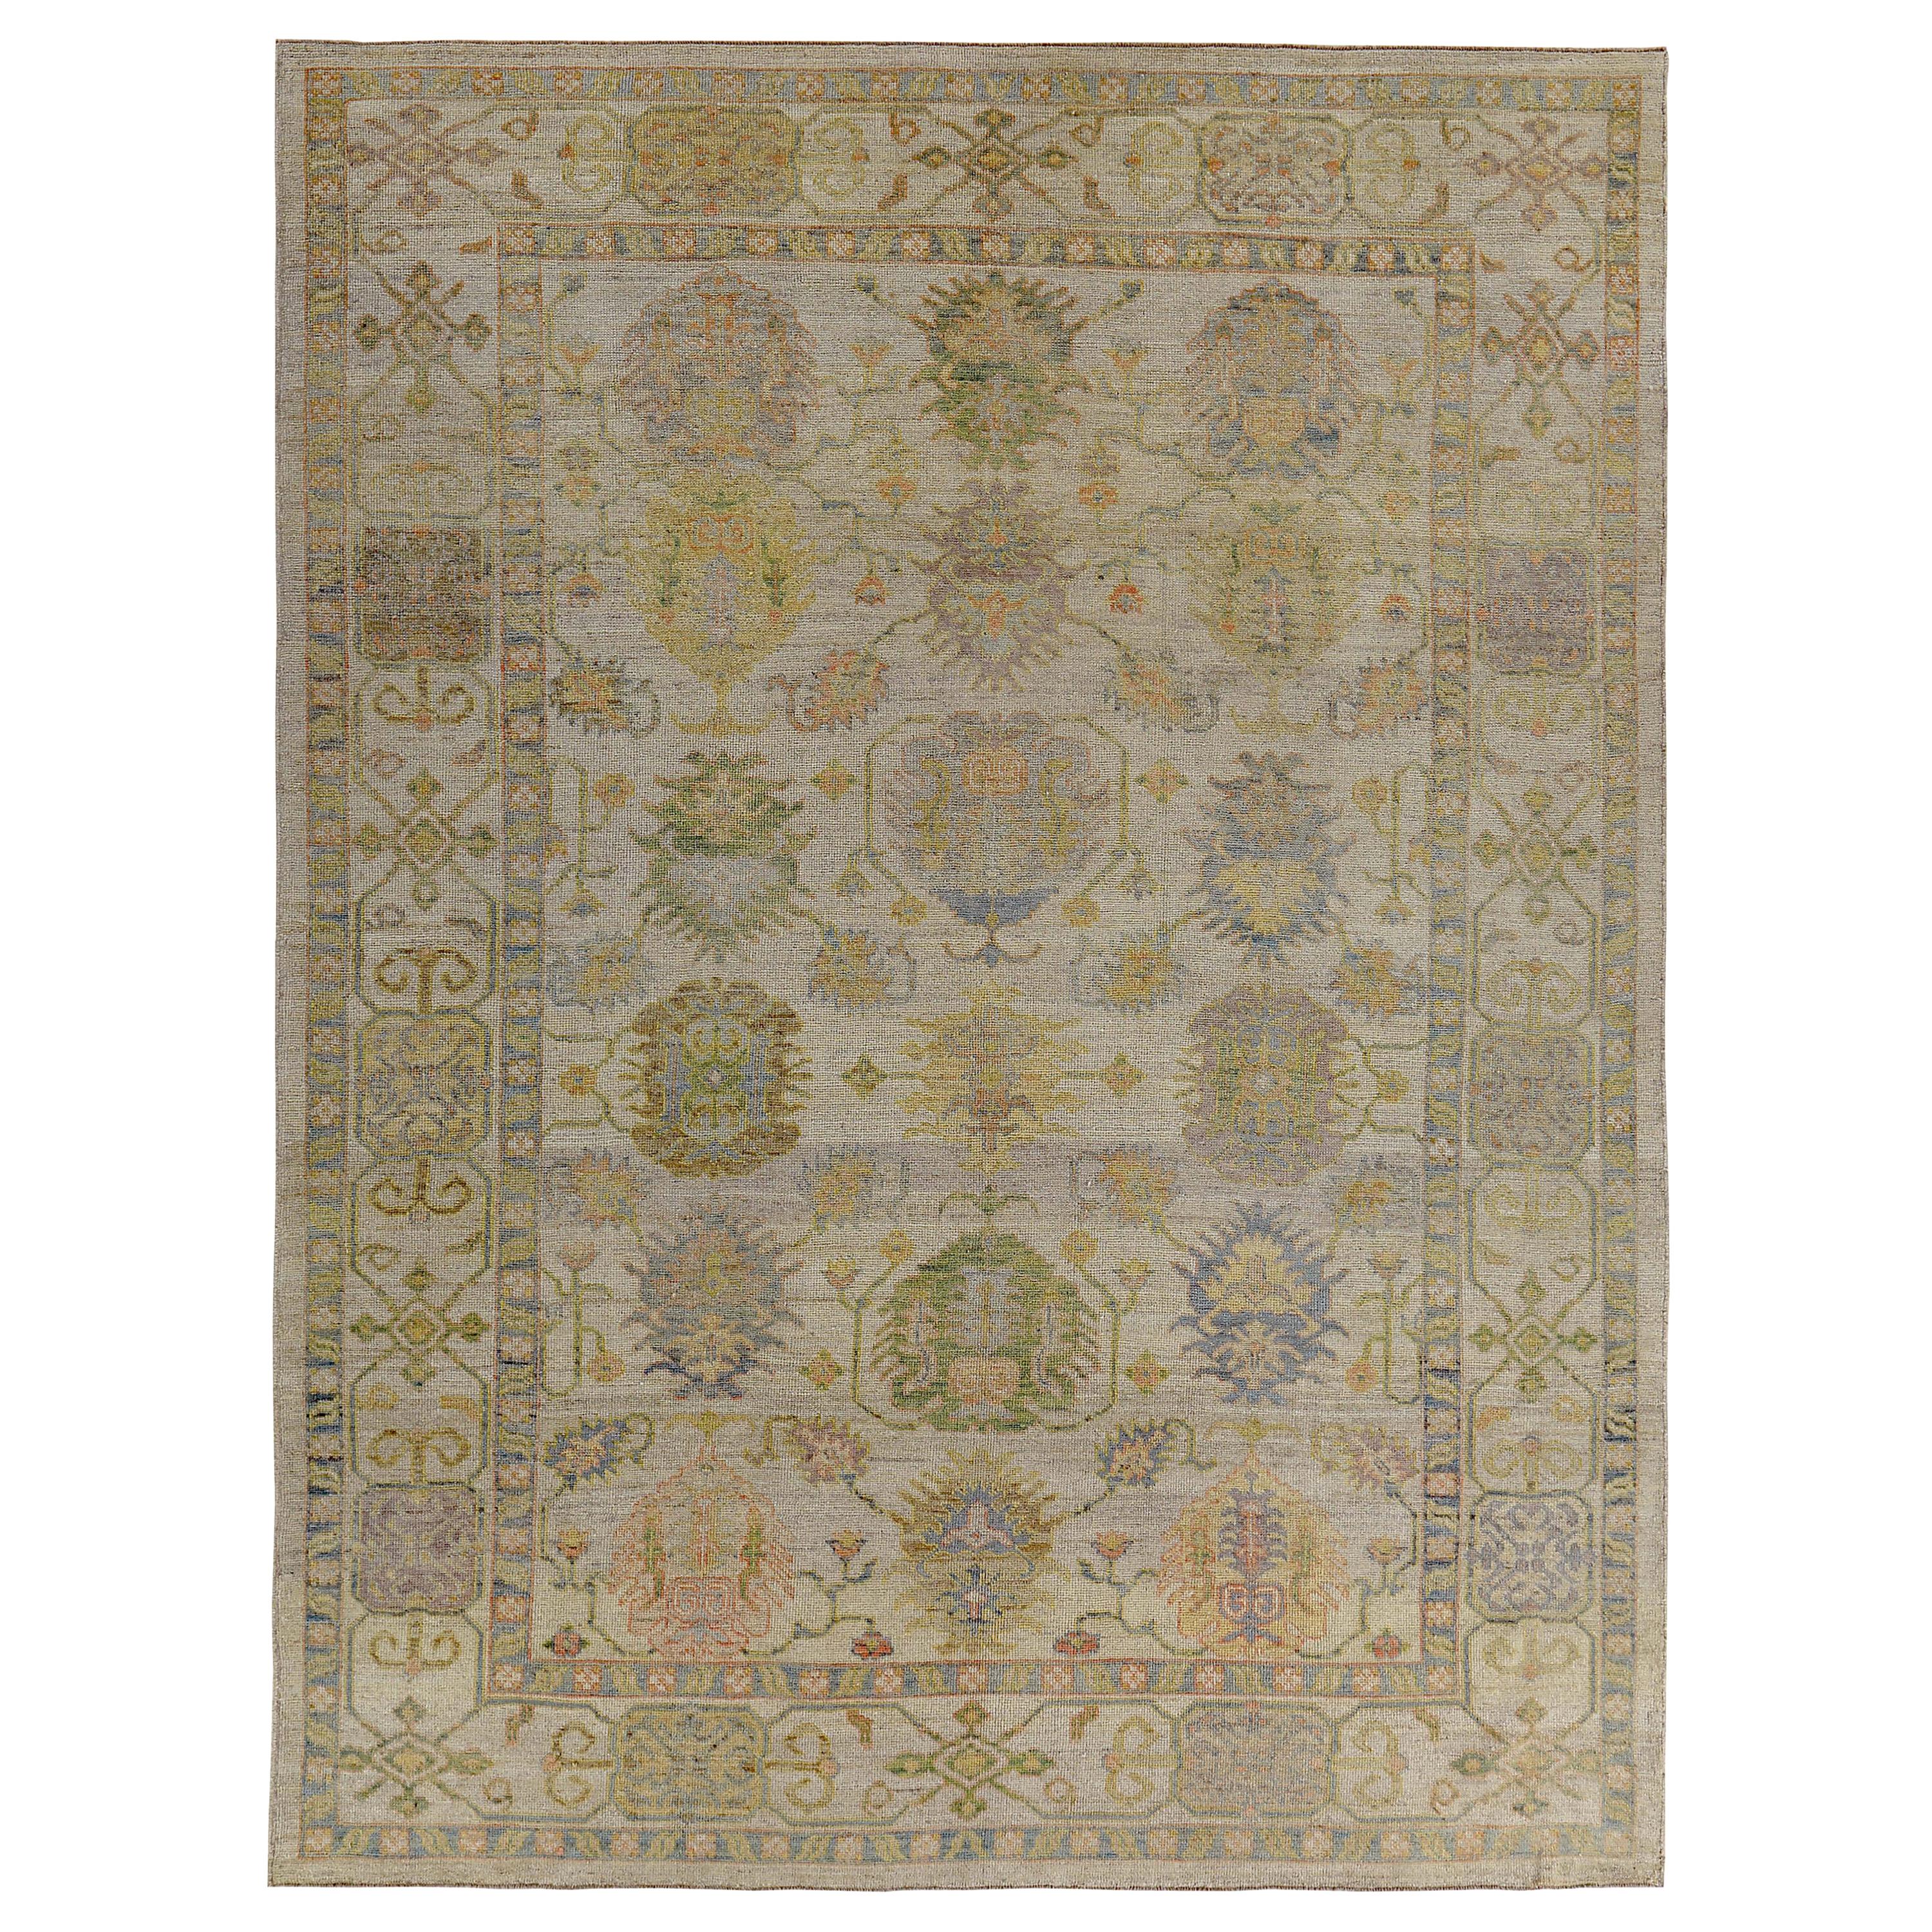 Turkish Oushak Rug with Blue, Orange and Green Flower Heads on Beige Field